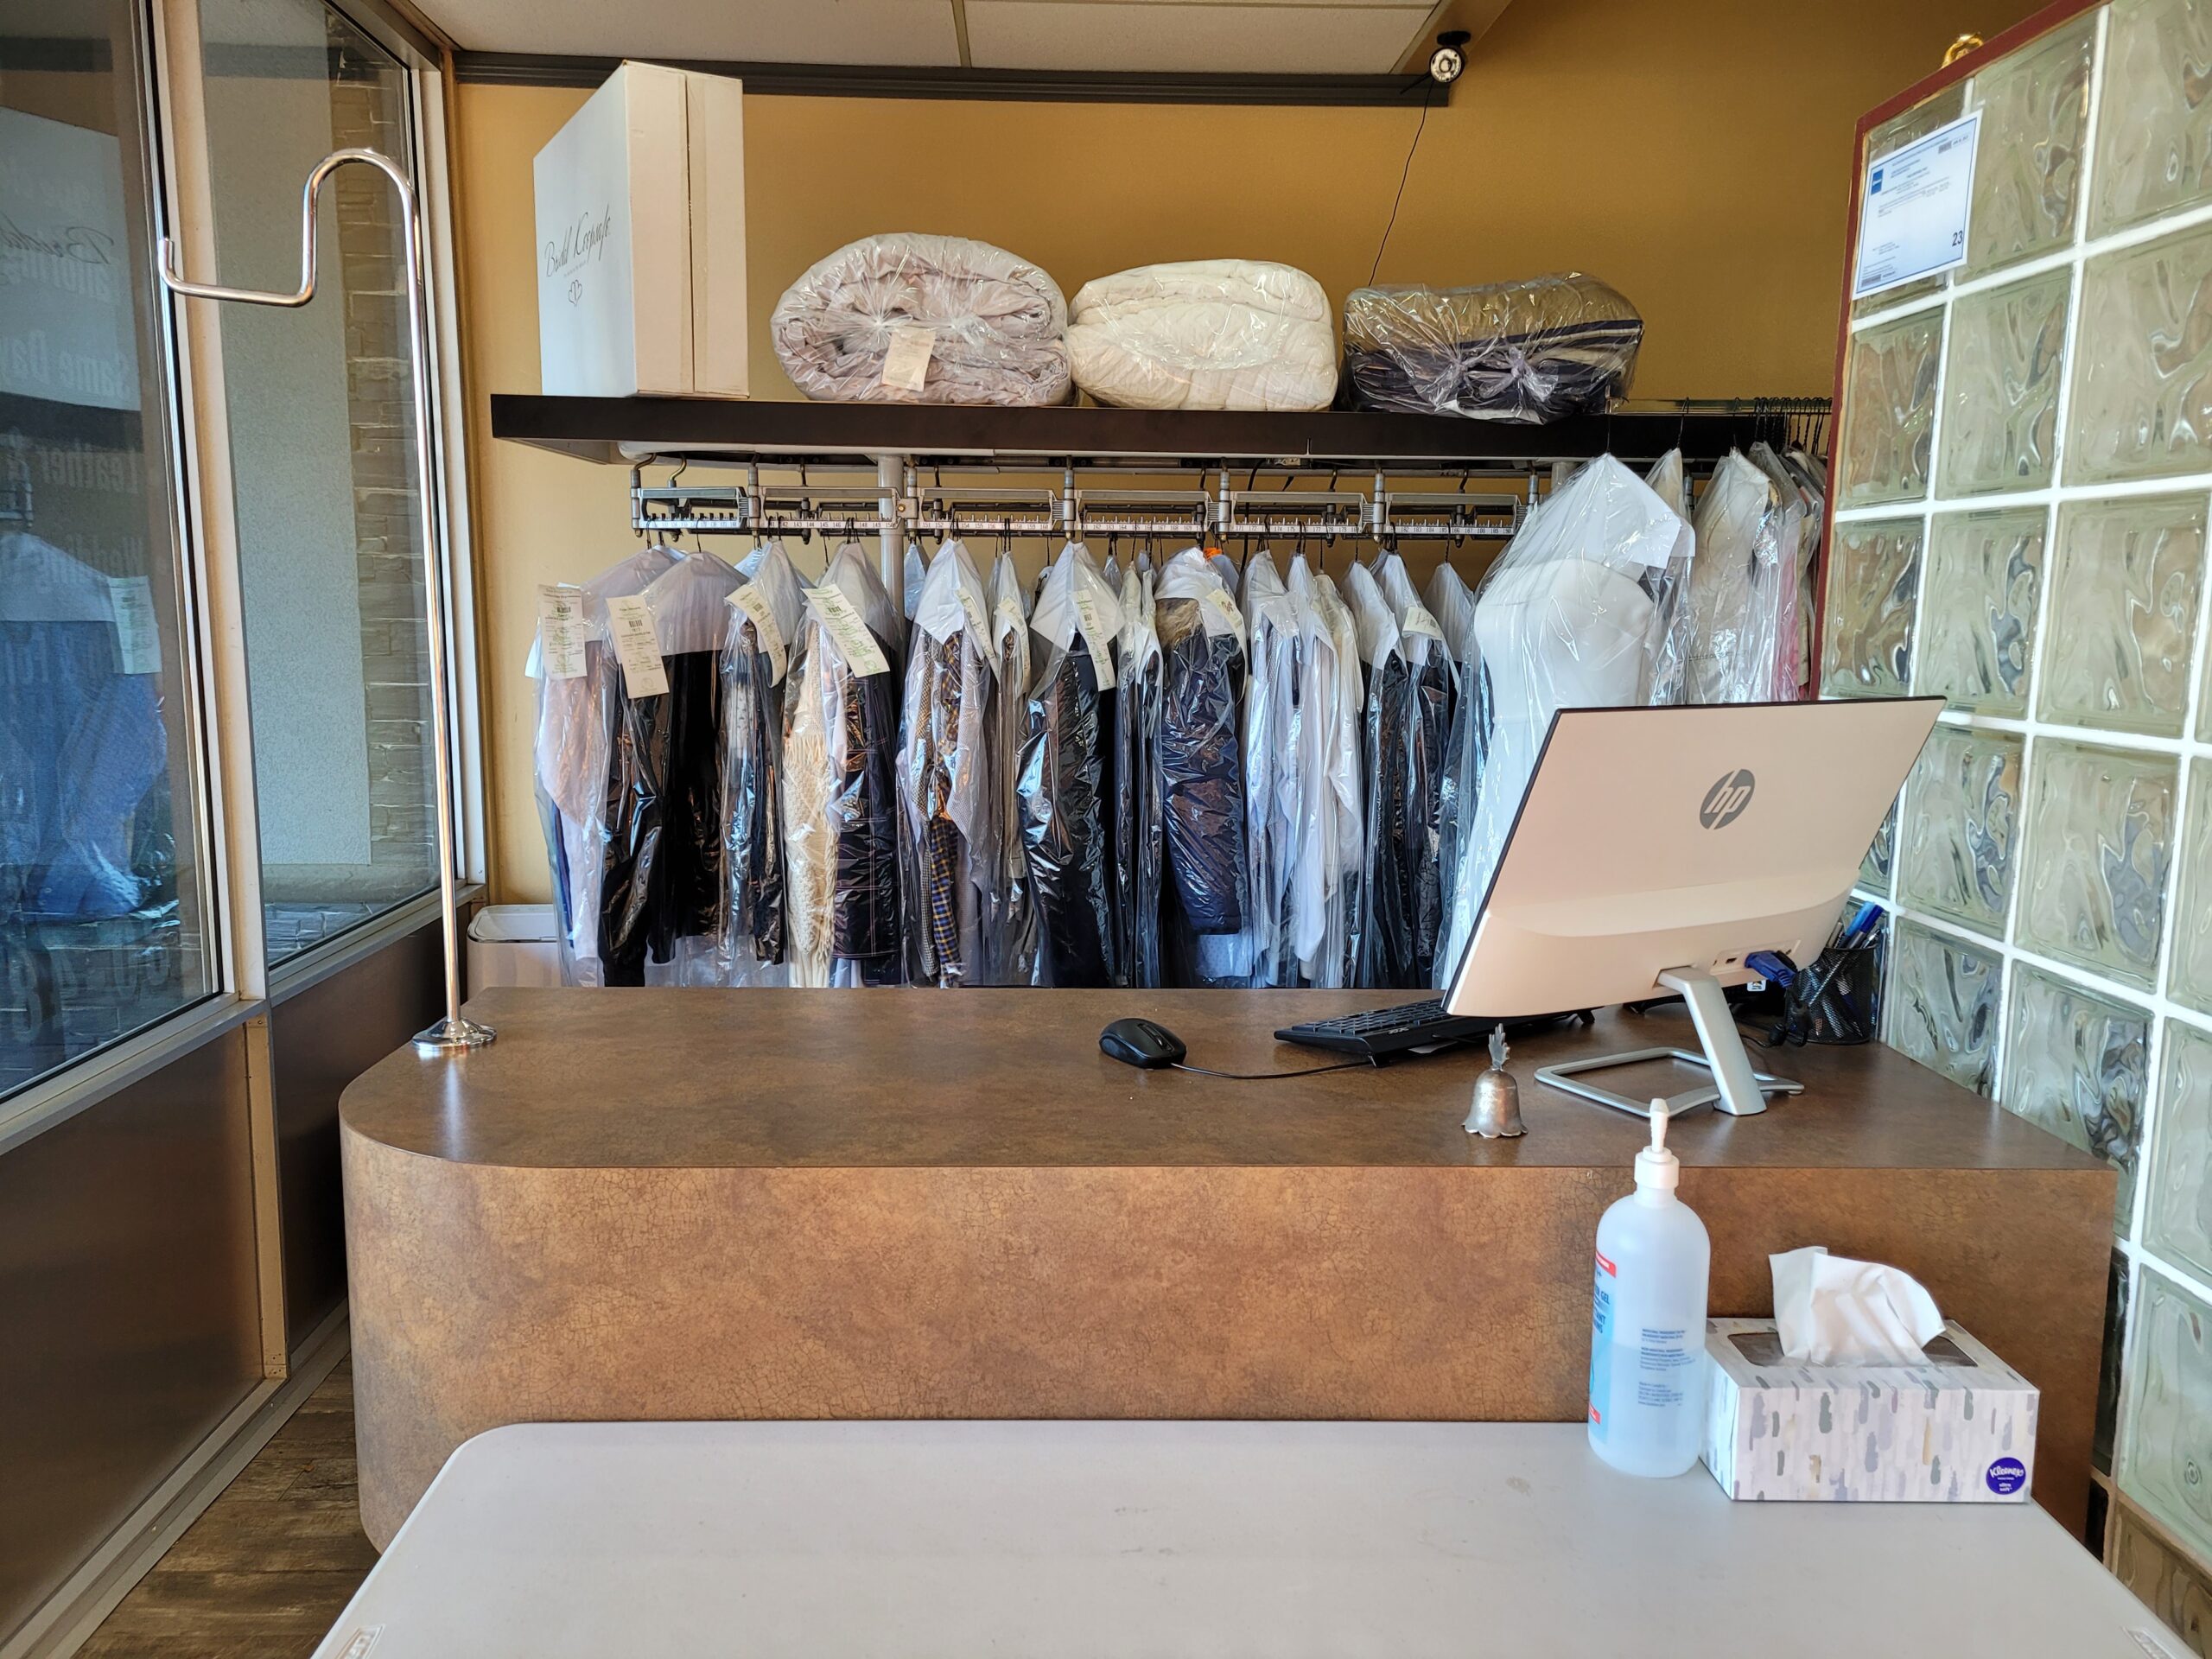 Valleyview Drycleaners &  Tailors | laundry | 9108D 142 St NW, Edmonton, AB T5R 0M7, Canada | 7804860457 OR +1 780-486-0457